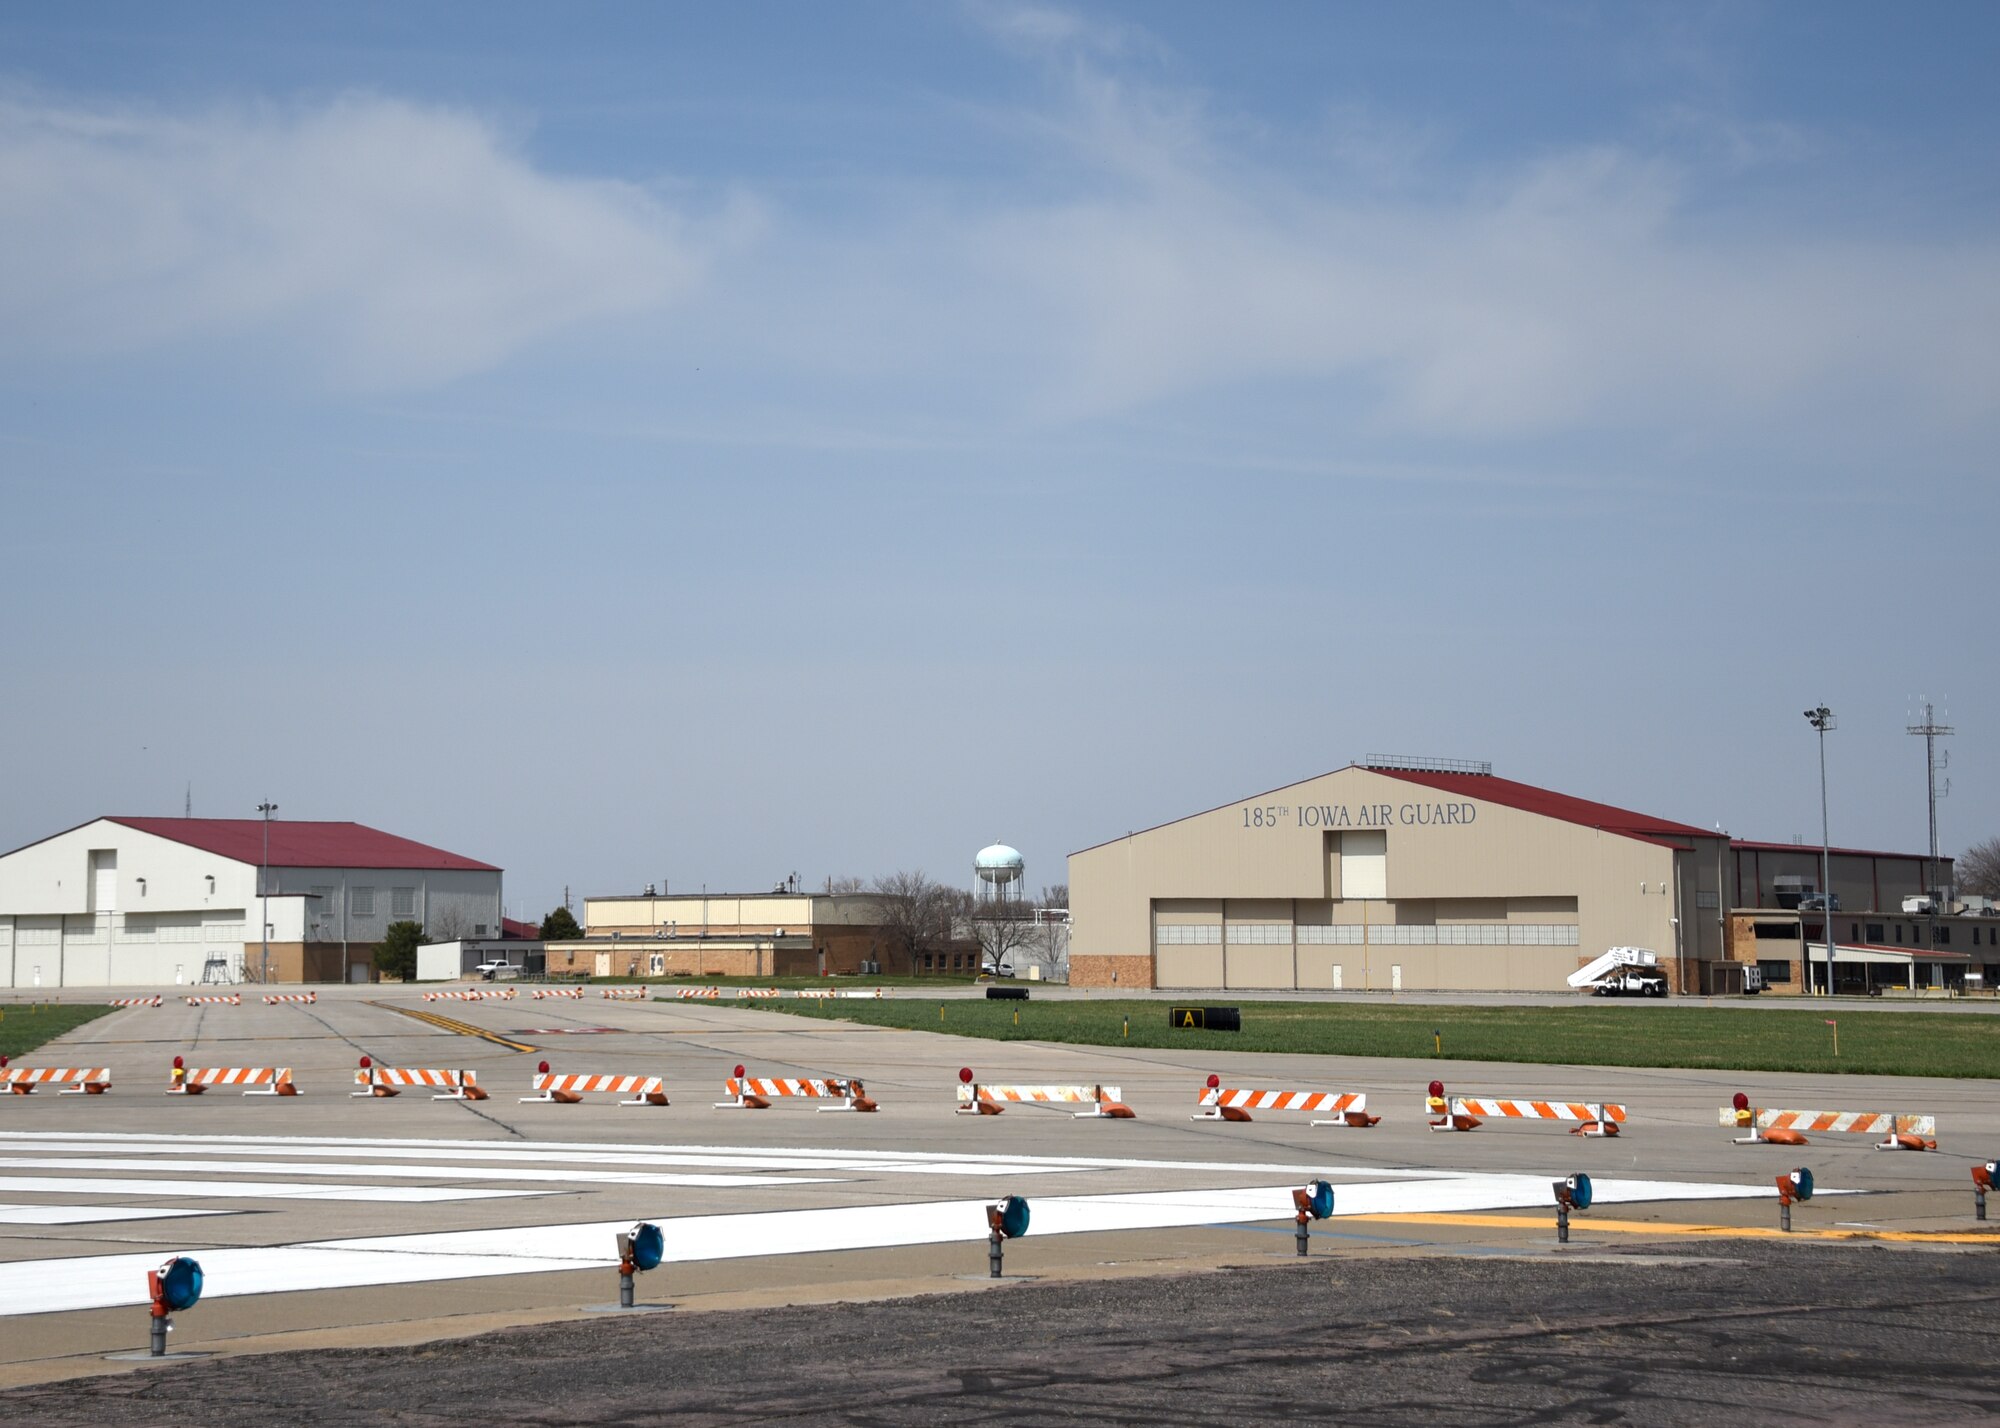 185th ARW continues operations during runway improvements > 185th